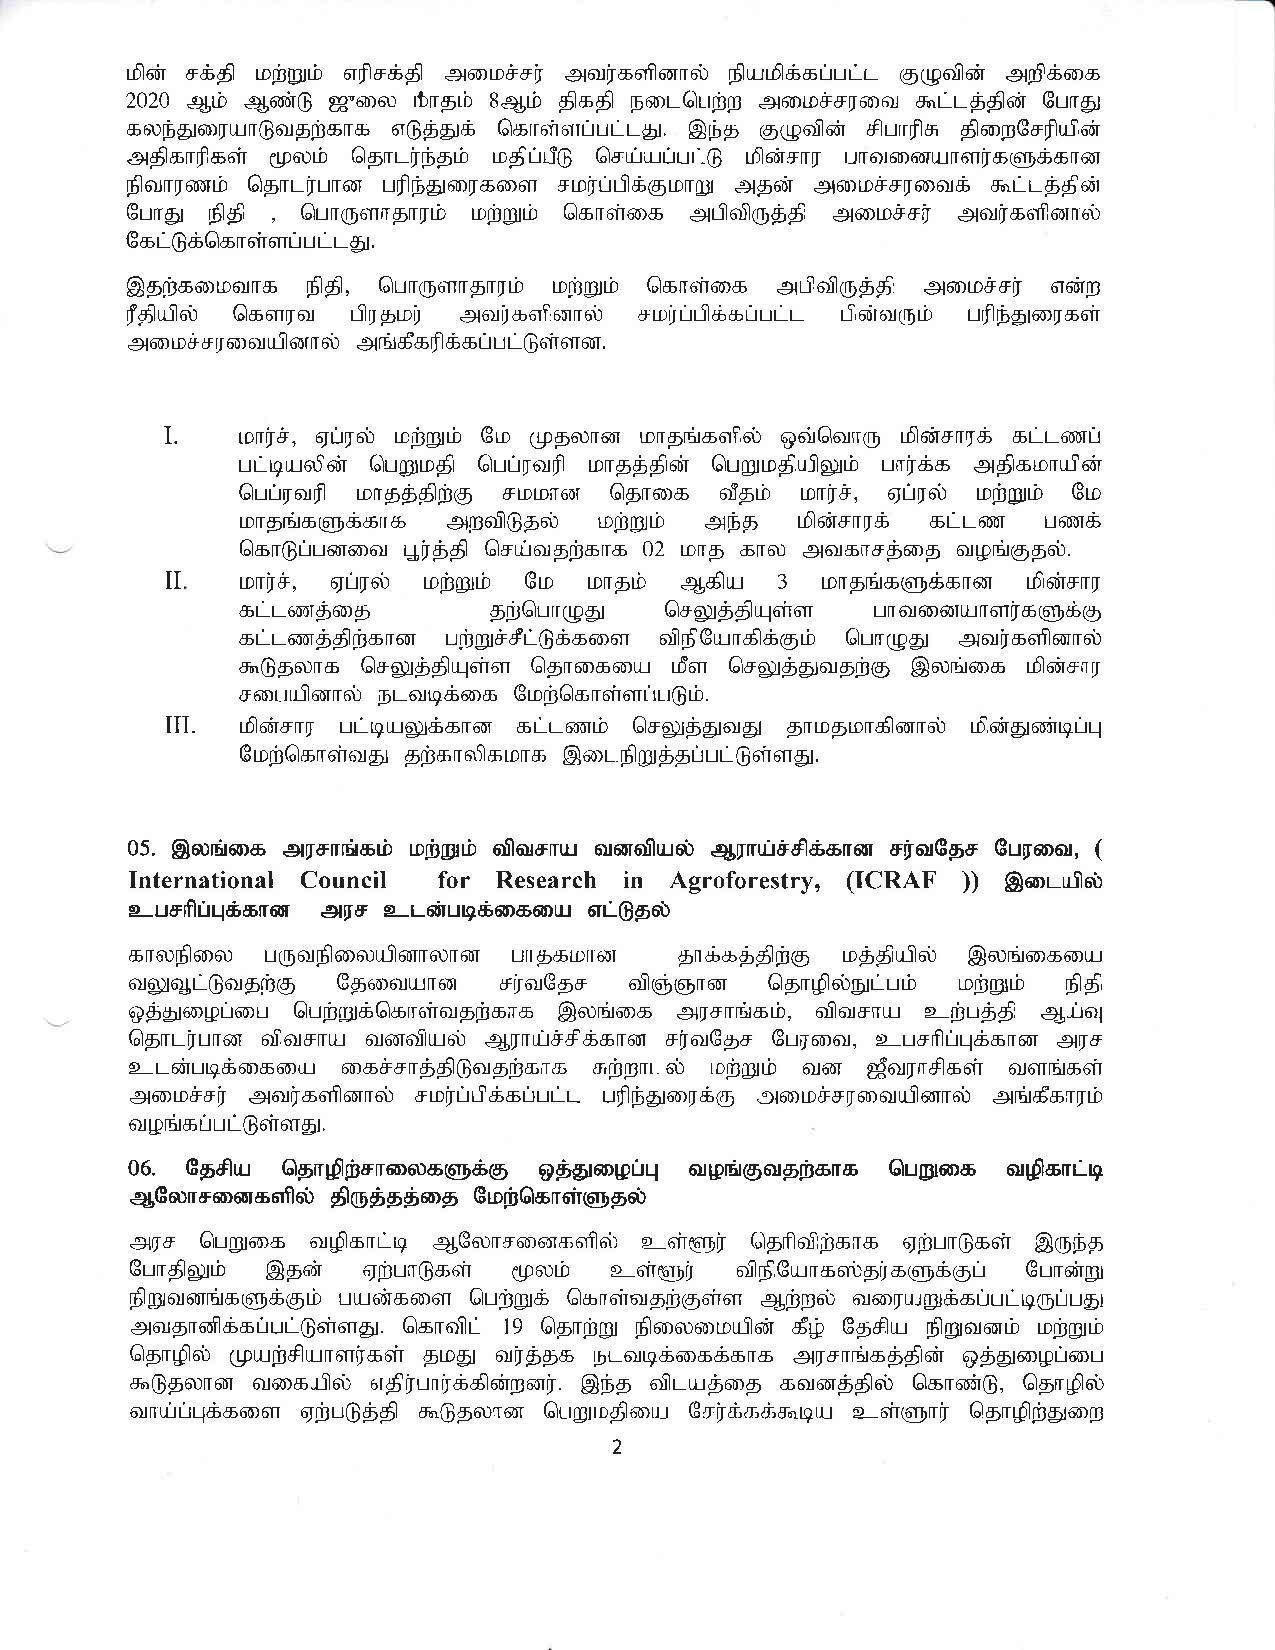 Cabinet Decision on 15.07.2020 Tamil page 002